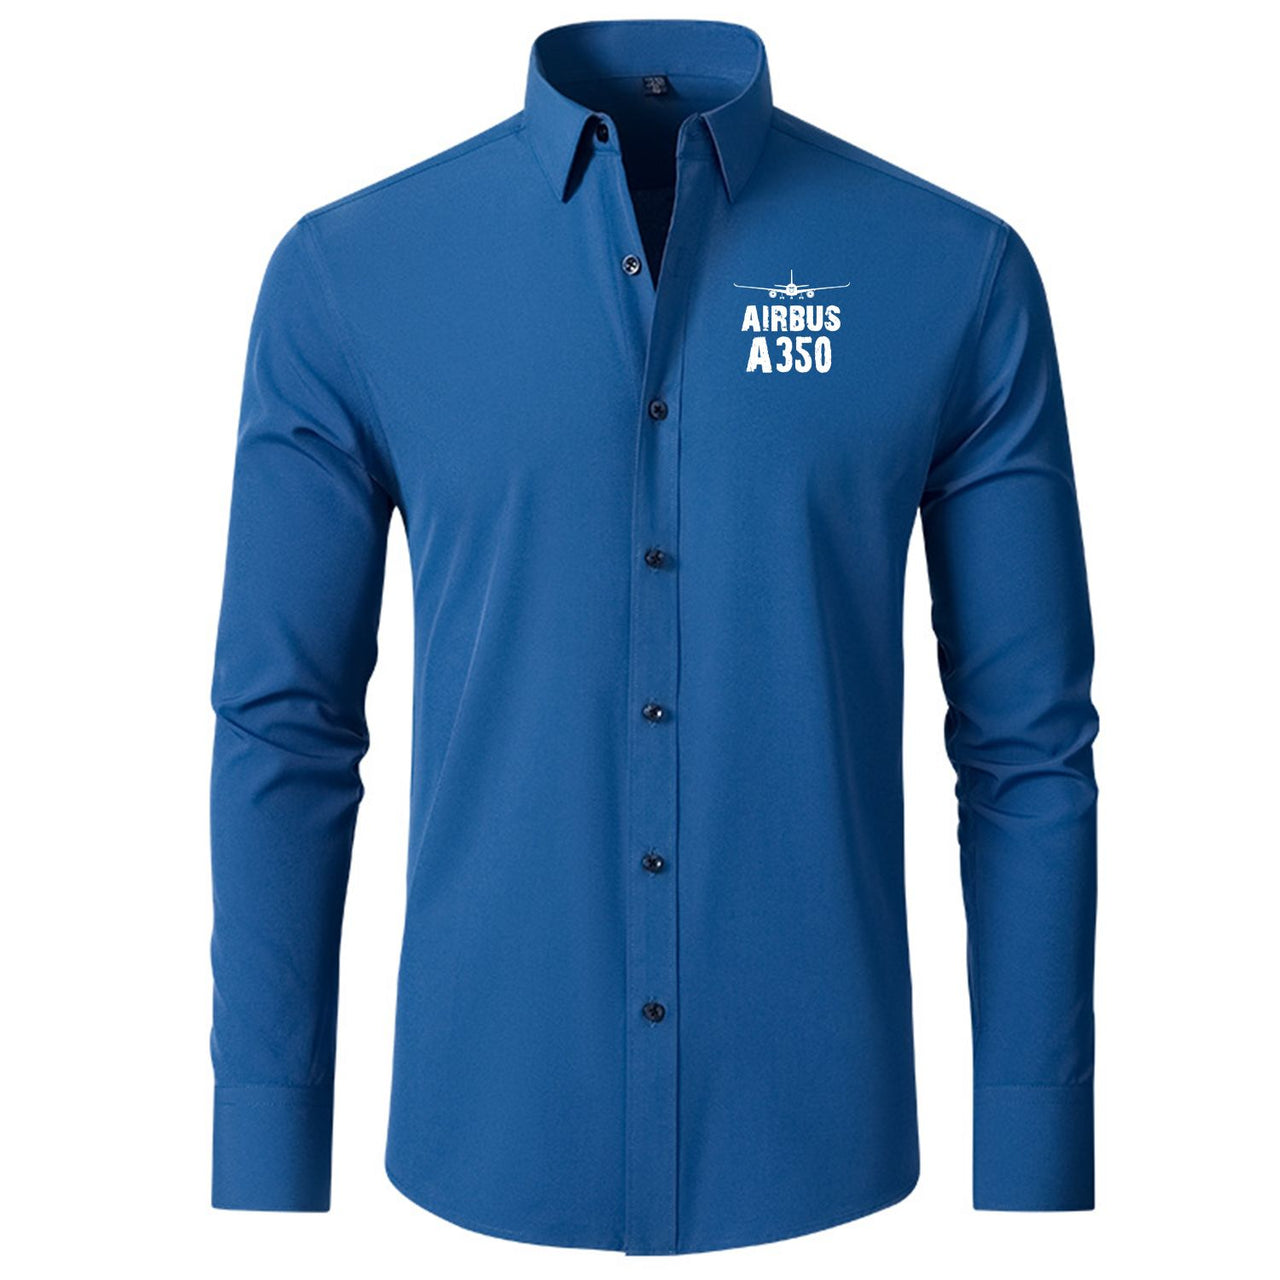 Airbus A350 & Plane Designed Long Sleeve Shirts